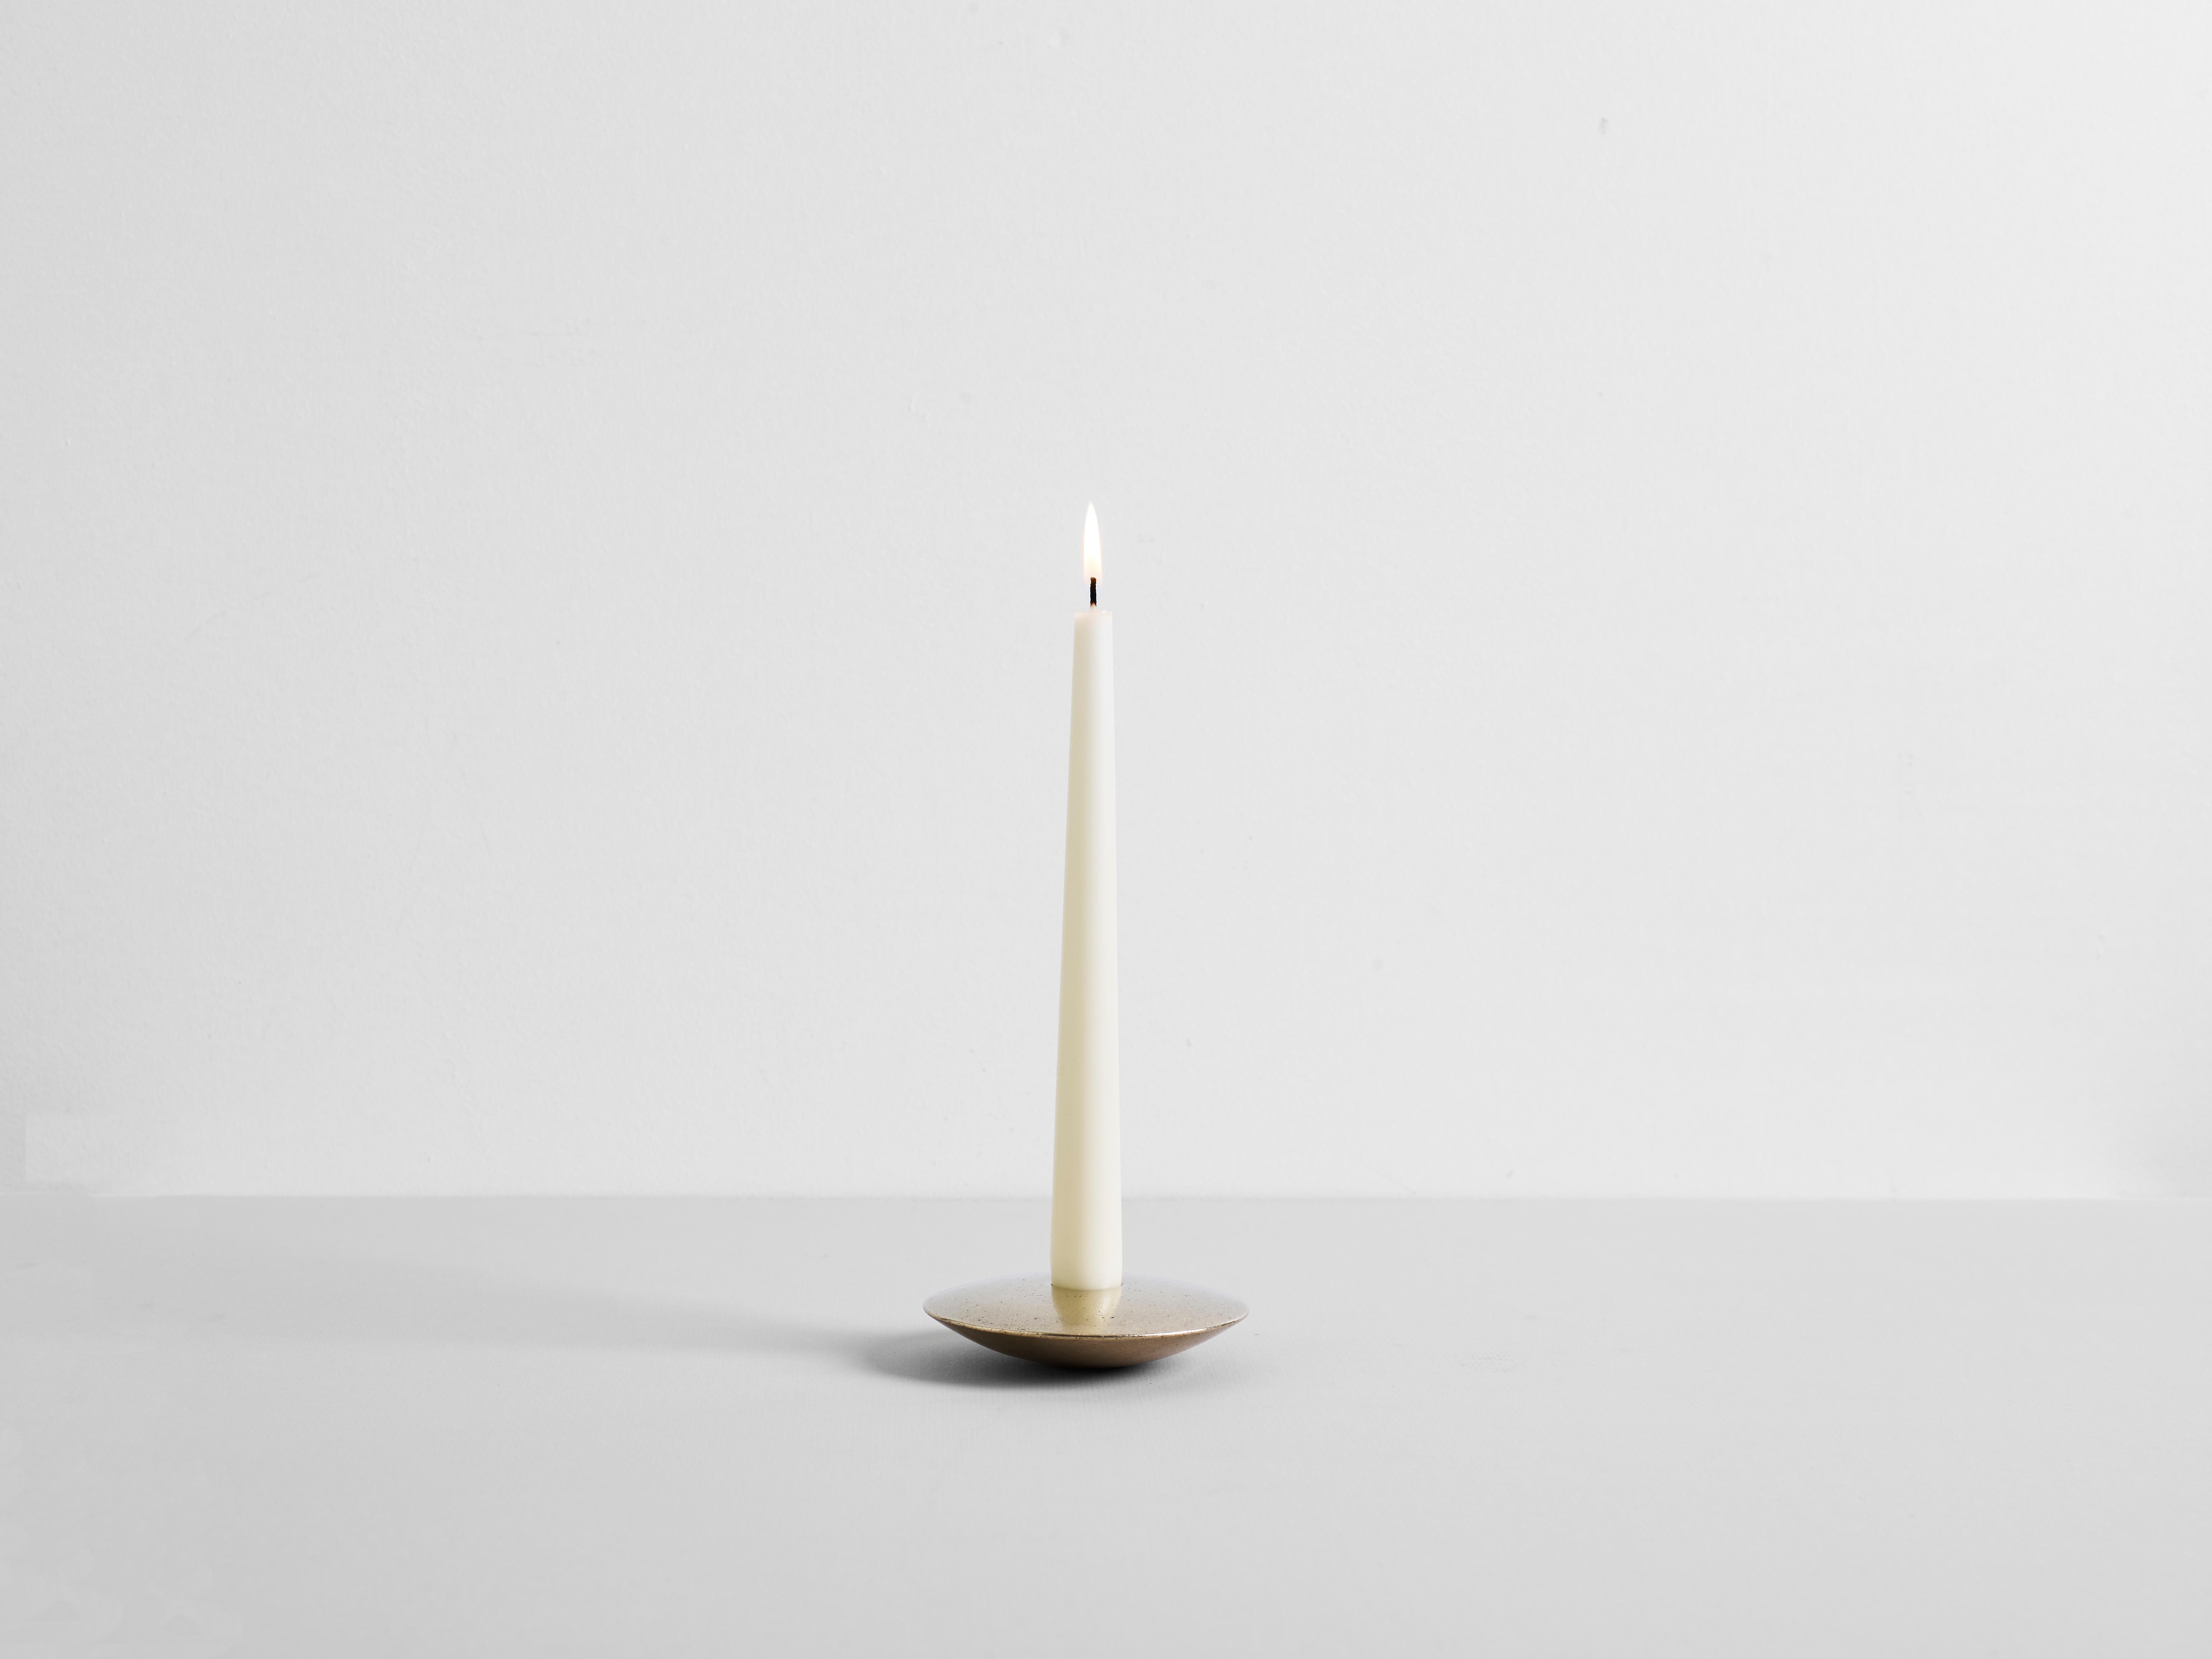 Ensemble of three contemporary brass candleholders - Henry Wilson

Almendres candleholder is a solid, hand poured brass form with an almond shaped profile.

Almendres candleholder is manufactured in small batches, slight variations will occur